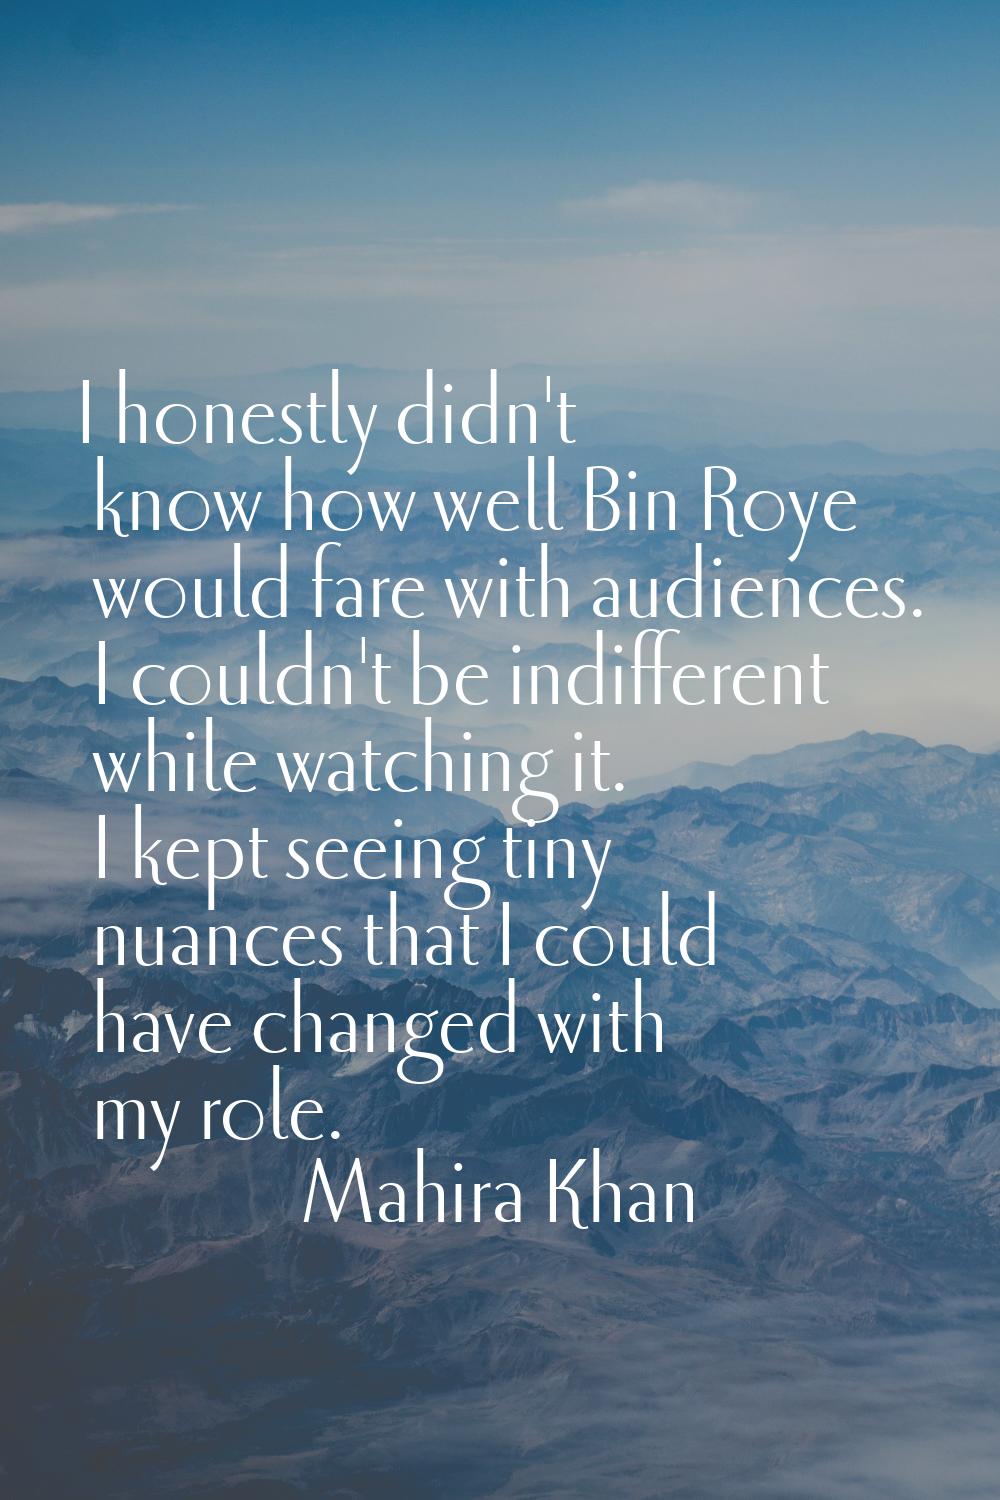 I honestly didn't know how well Bin Roye would fare with audiences. I couldn't be indifferent while